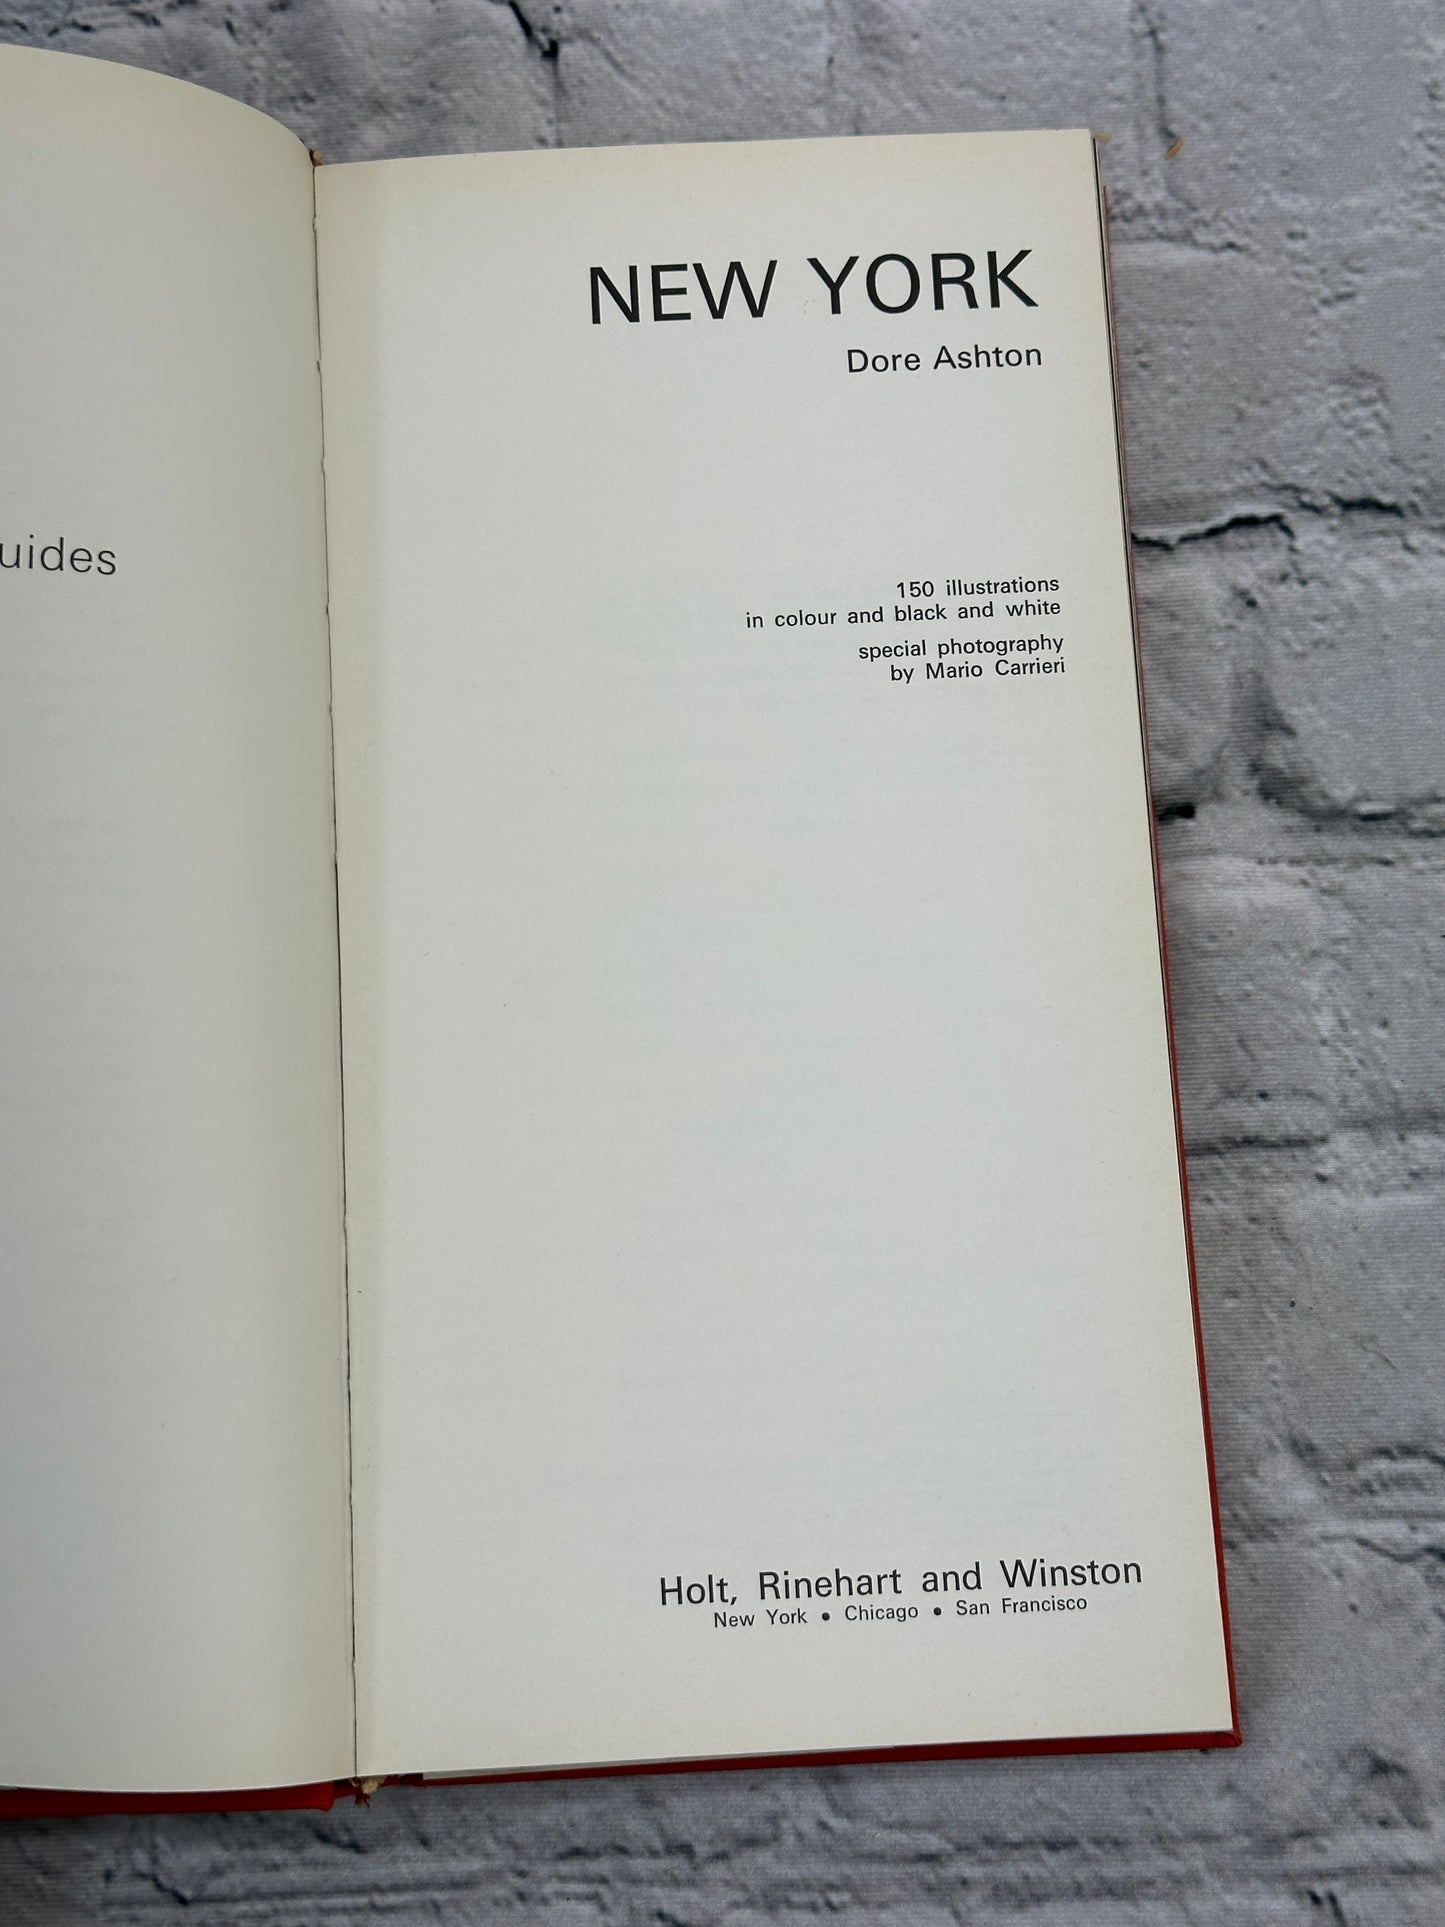 World Cultural Guides New York by Dore Ashton [1972 · First Edition]